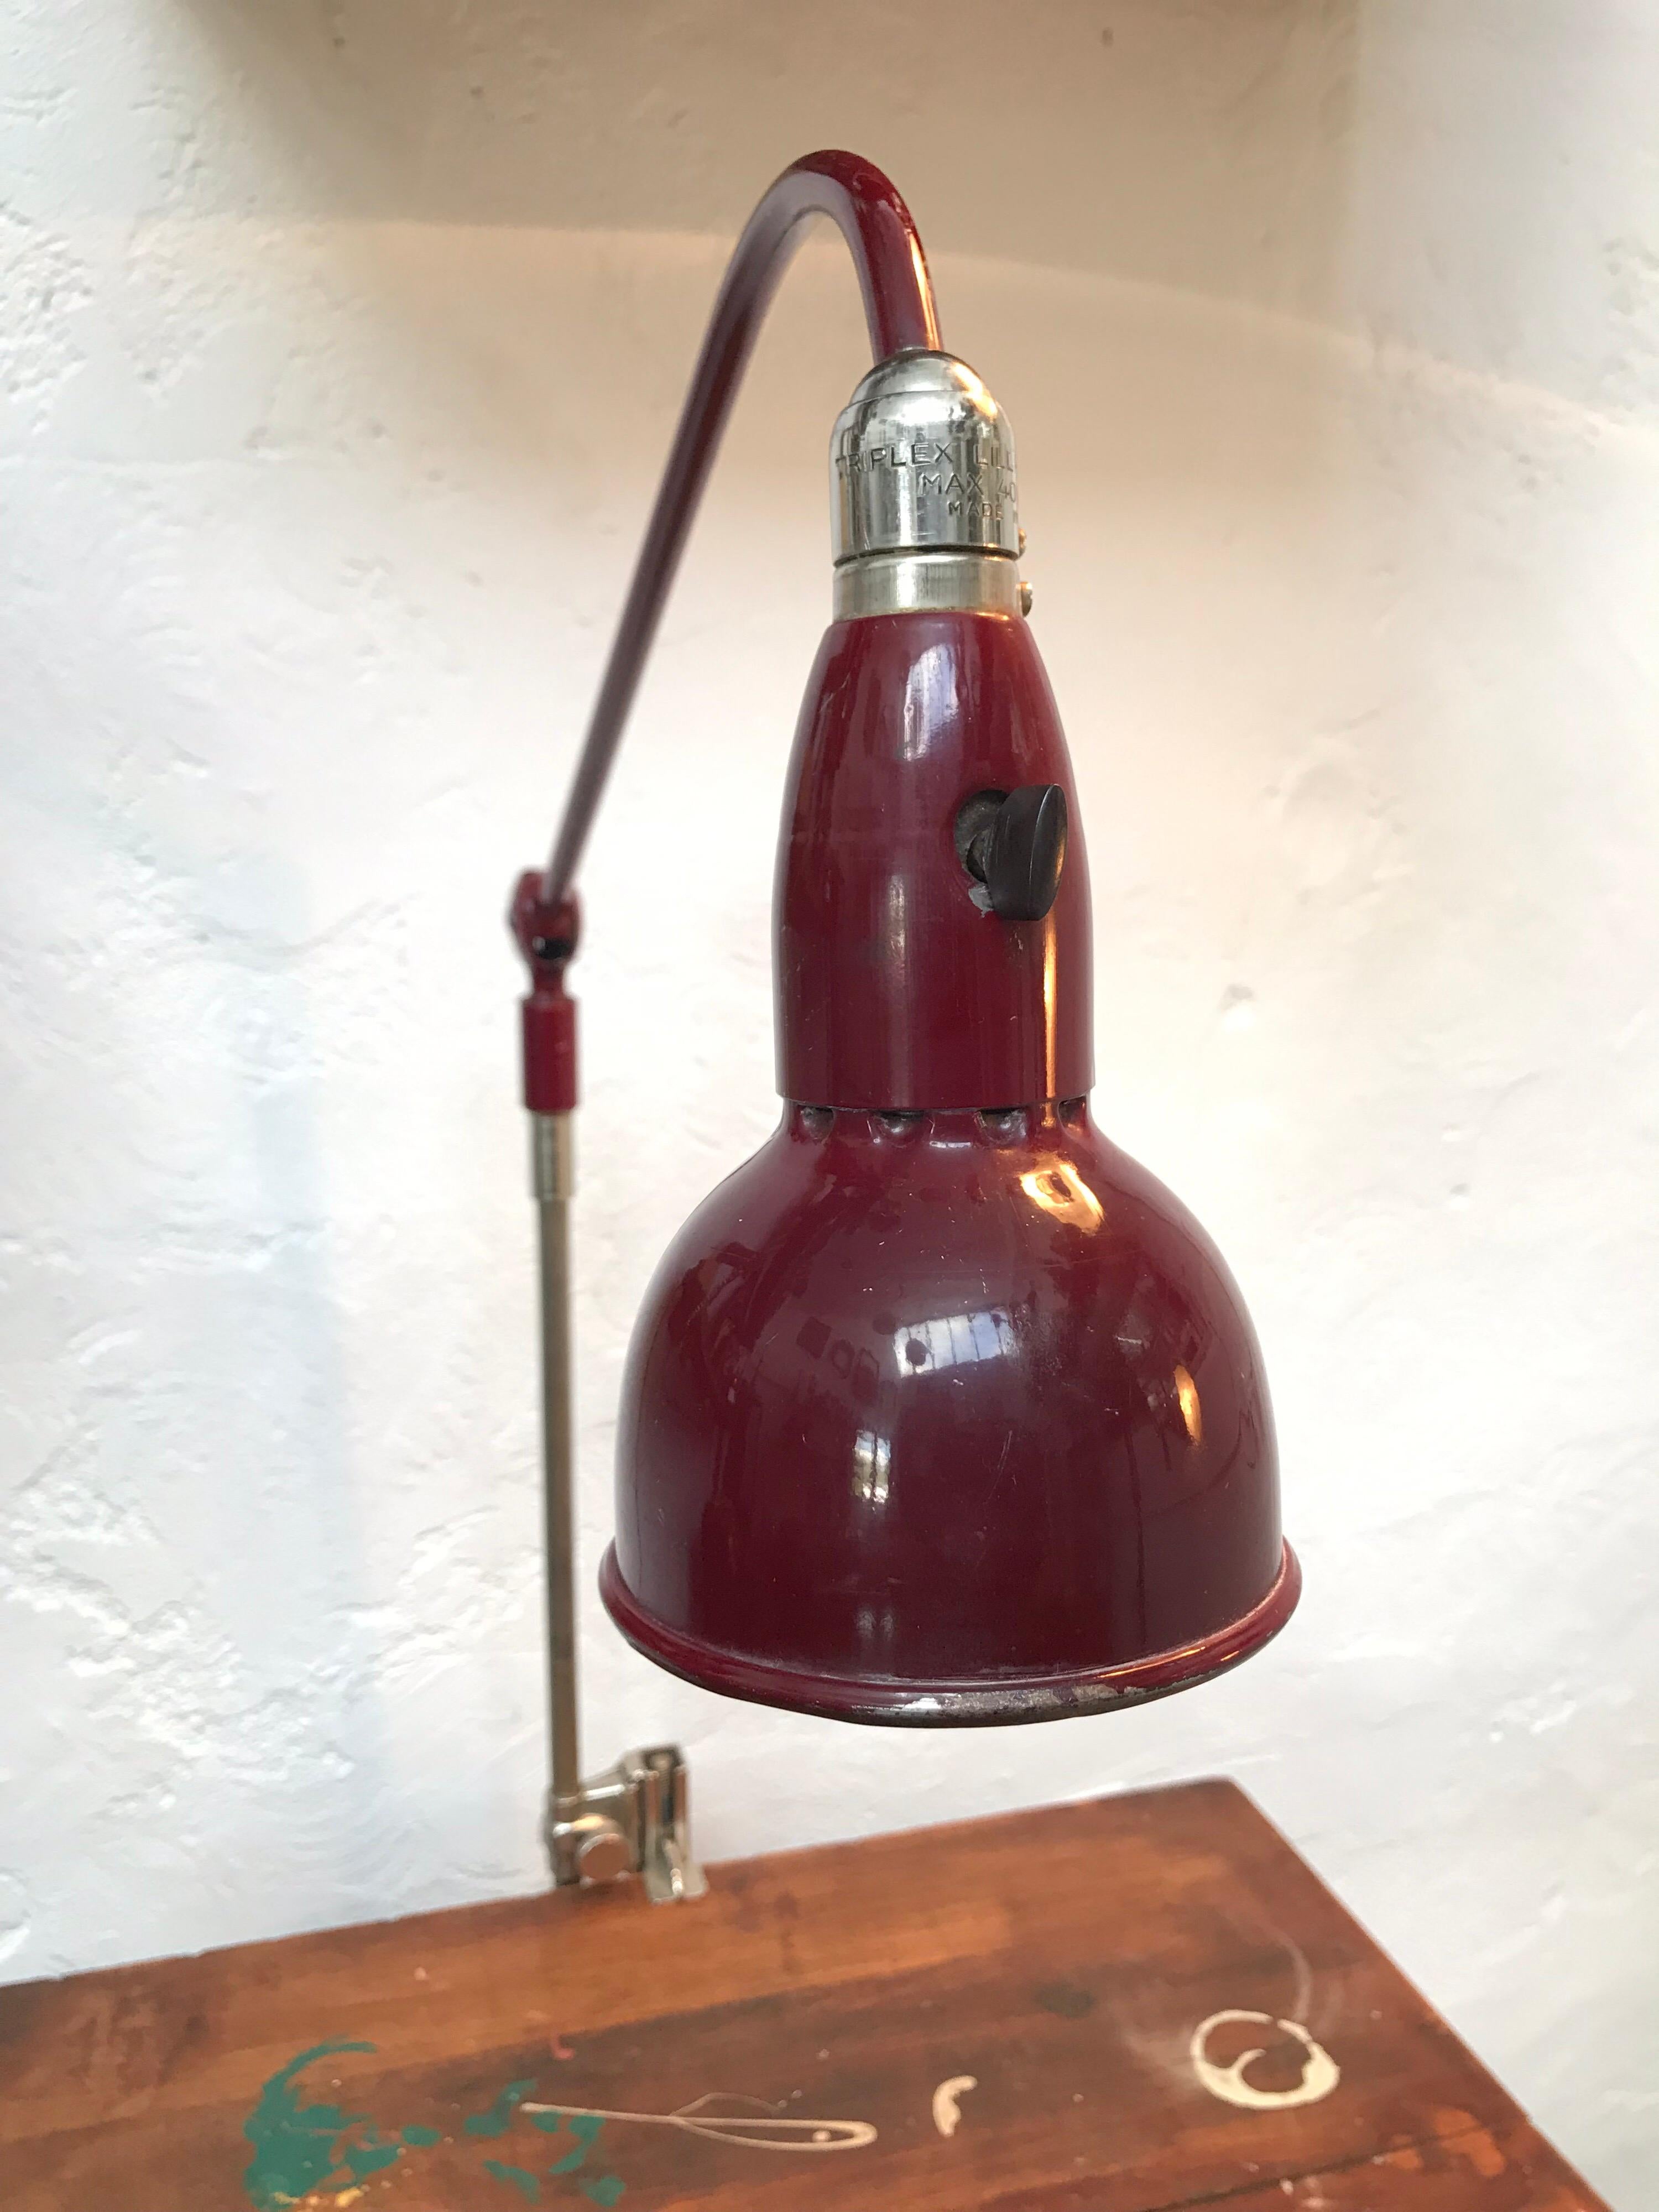 Vintage Triplex “lill pendel” table lamp made by ASEA of Sweden in the 1950s.
This is a rare model in great vintage condition
New wiring and ready to use.
 